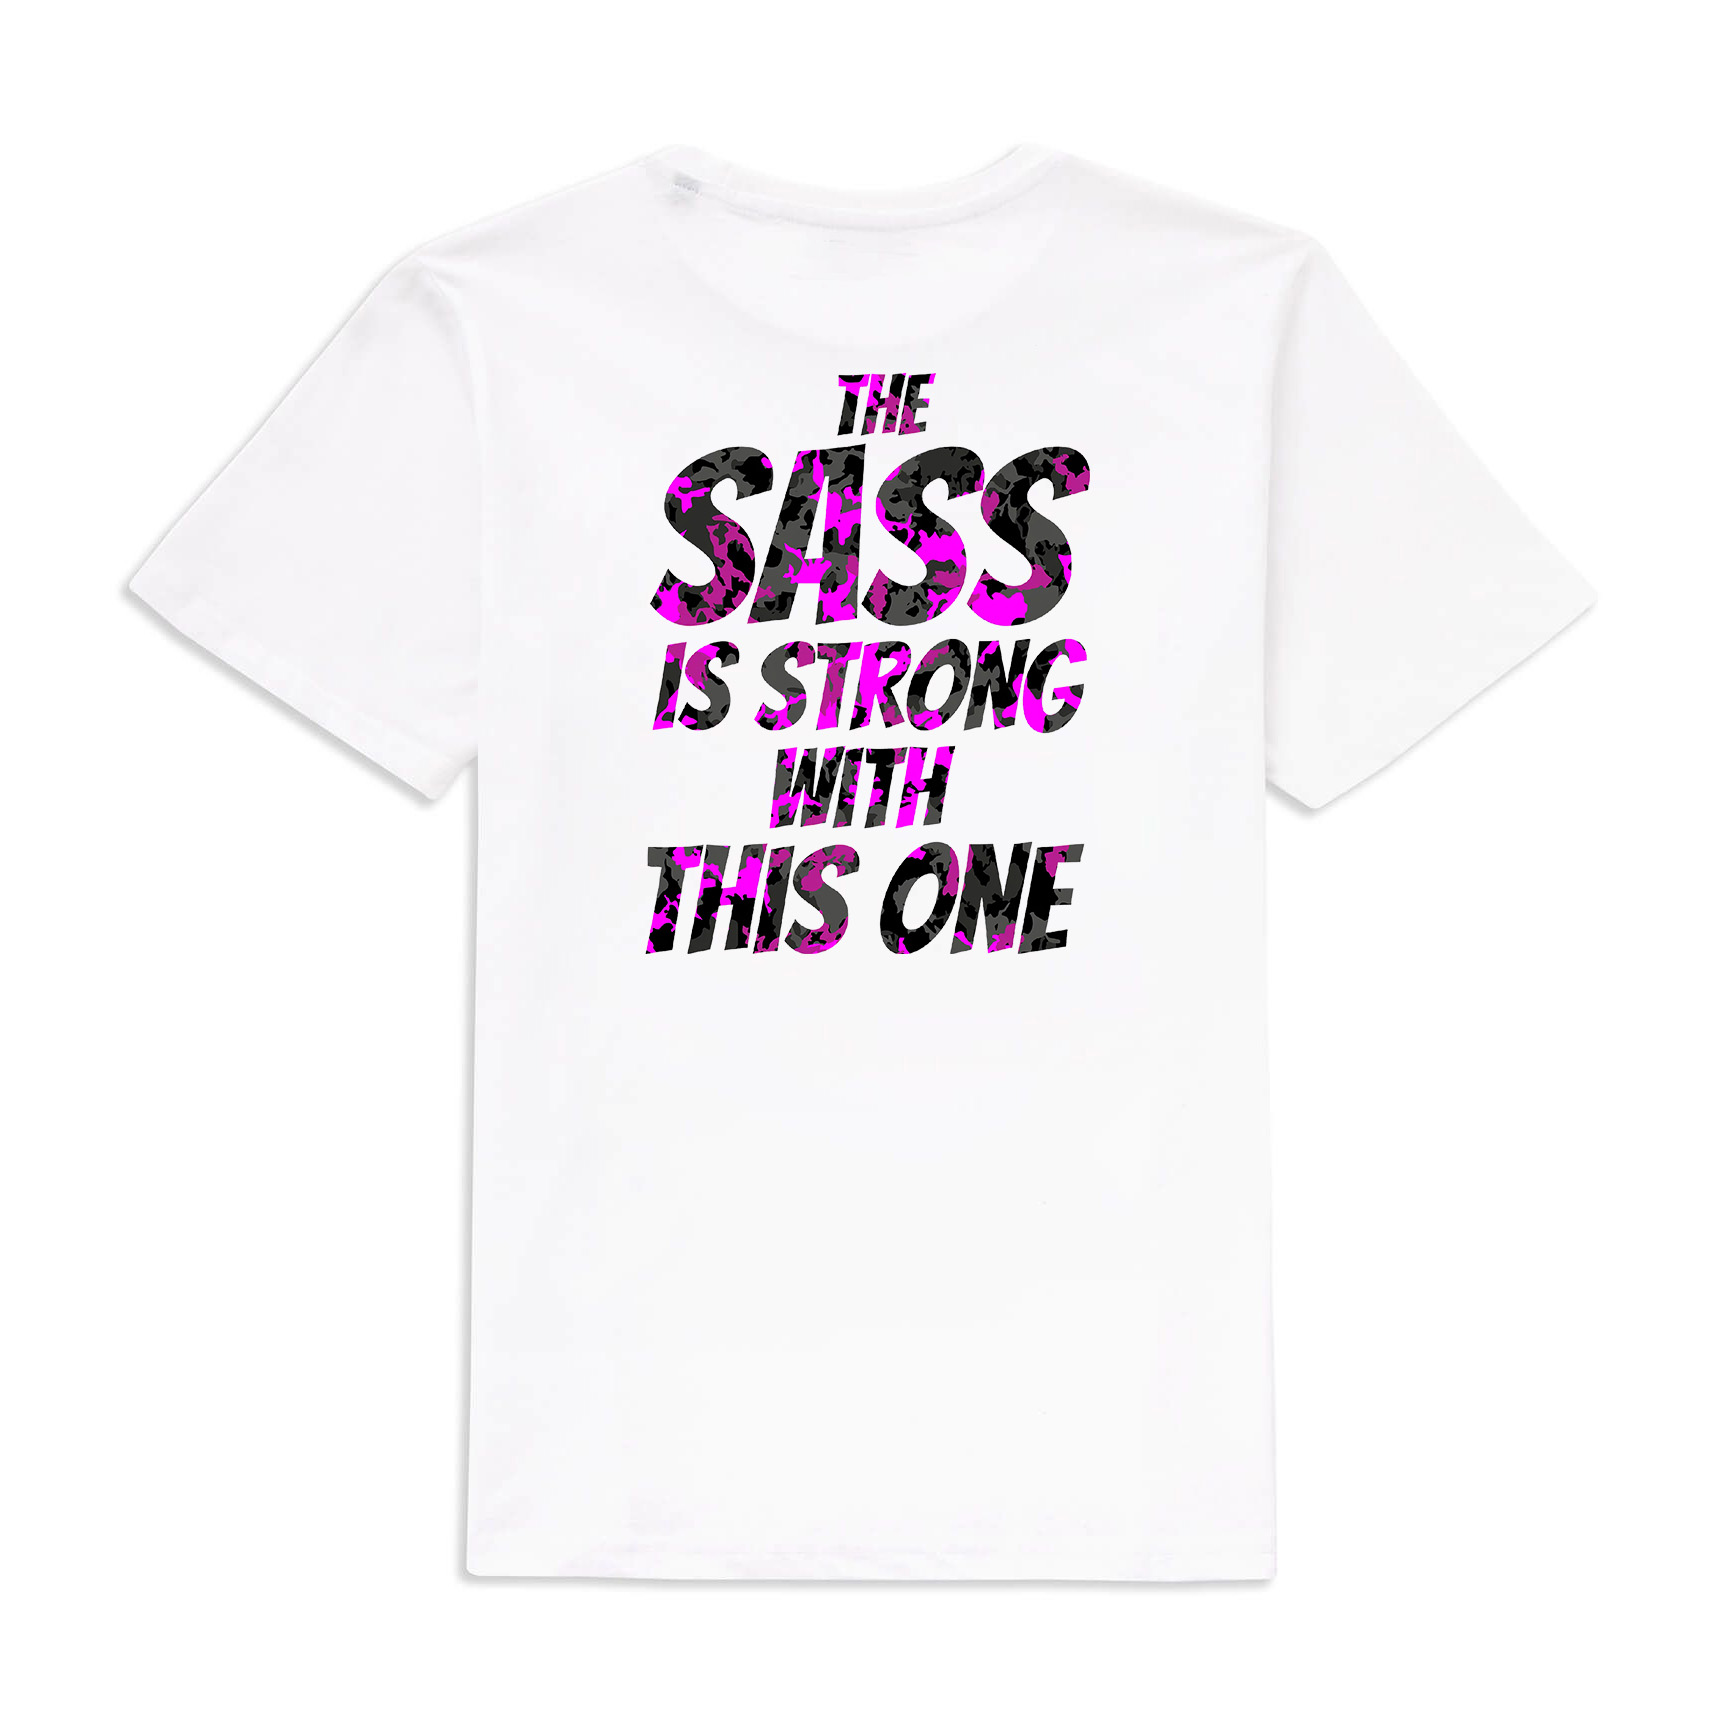 The Sass Is Strong With This One Printed Women's T-shirt